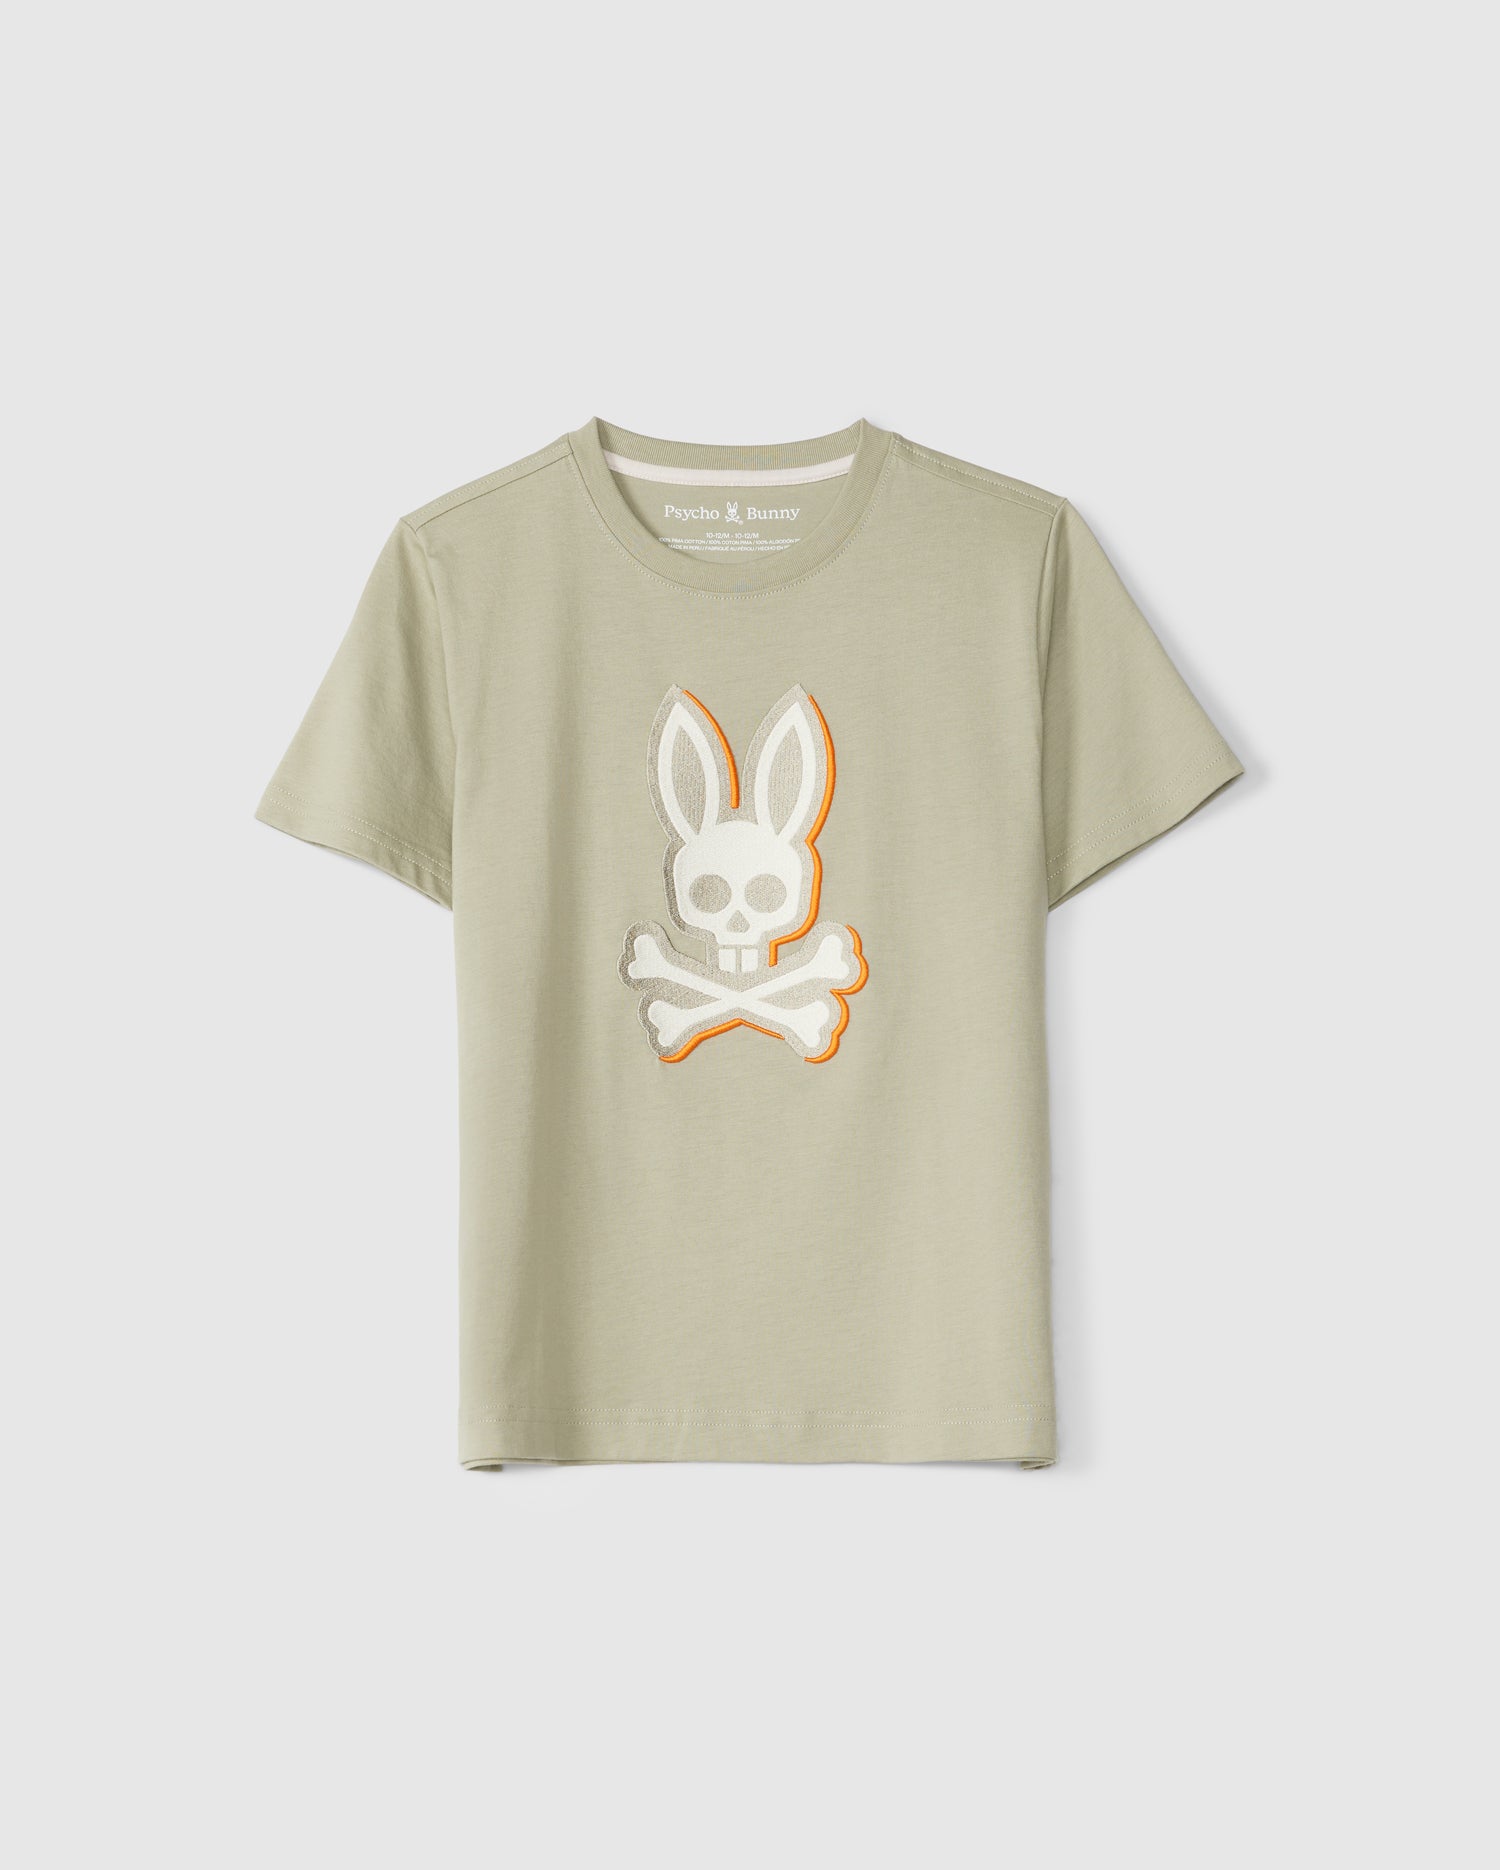 A light olive-green KIDS KAYDEN GRAPHIC TEE - B0U676C200 from Psycho Bunny featuring a Bunny embroidered logo with a skull and crossbones design in the center. The bunny has long ears, and the crossbones are positioned below the skull. The background is a neutral light gray.